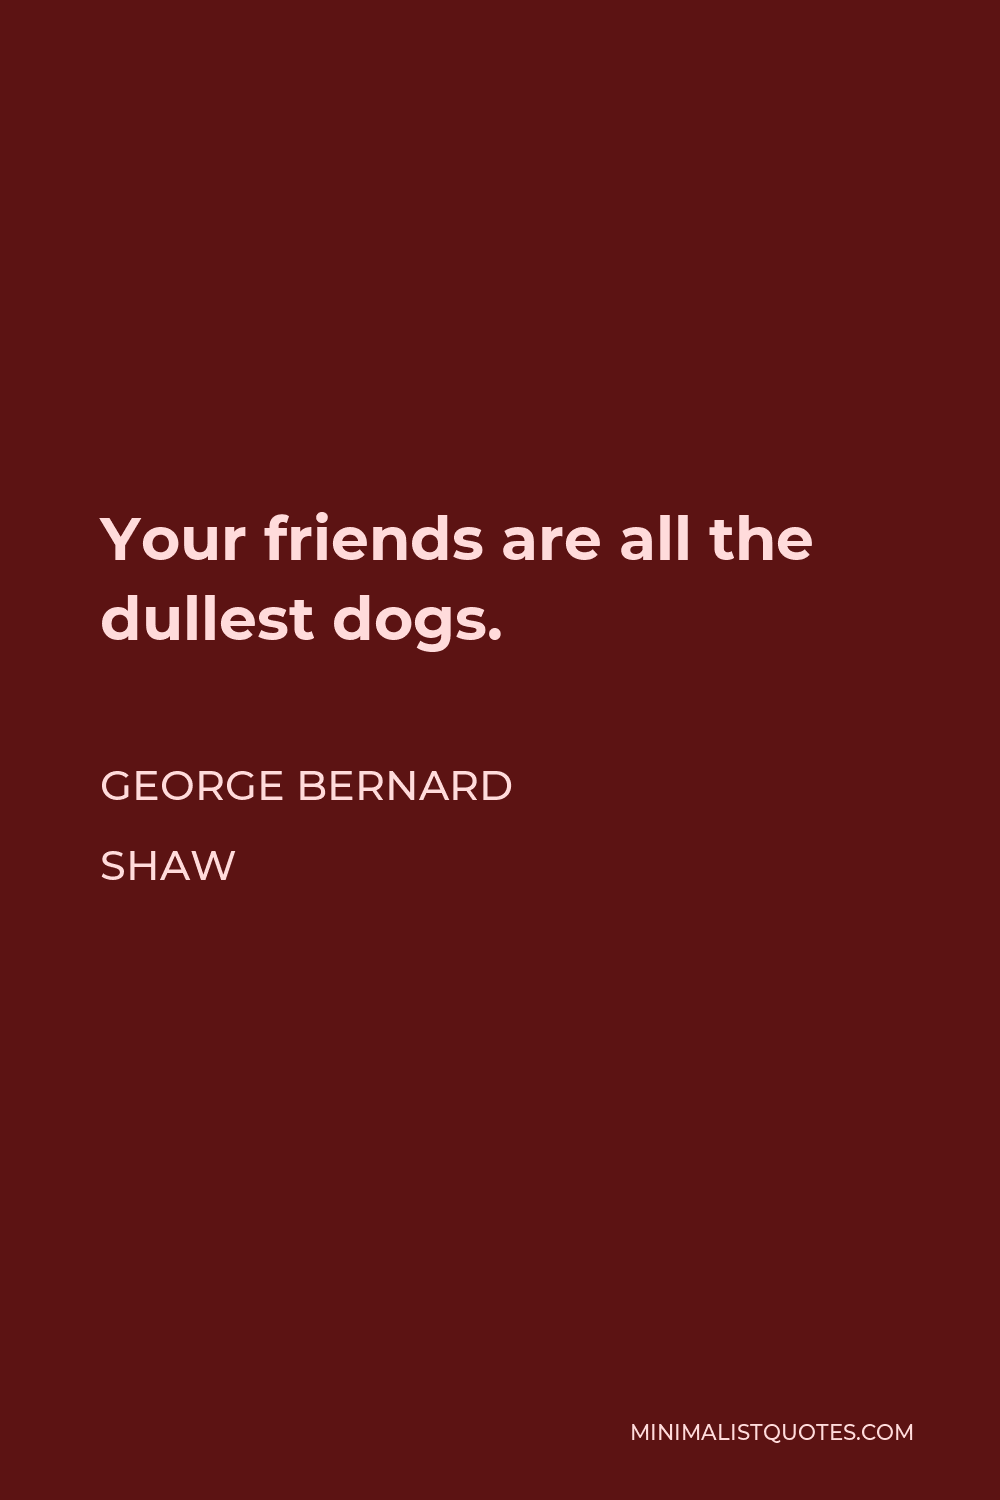 George Bernard Shaw Quote - Your friends are all the dullest dogs.